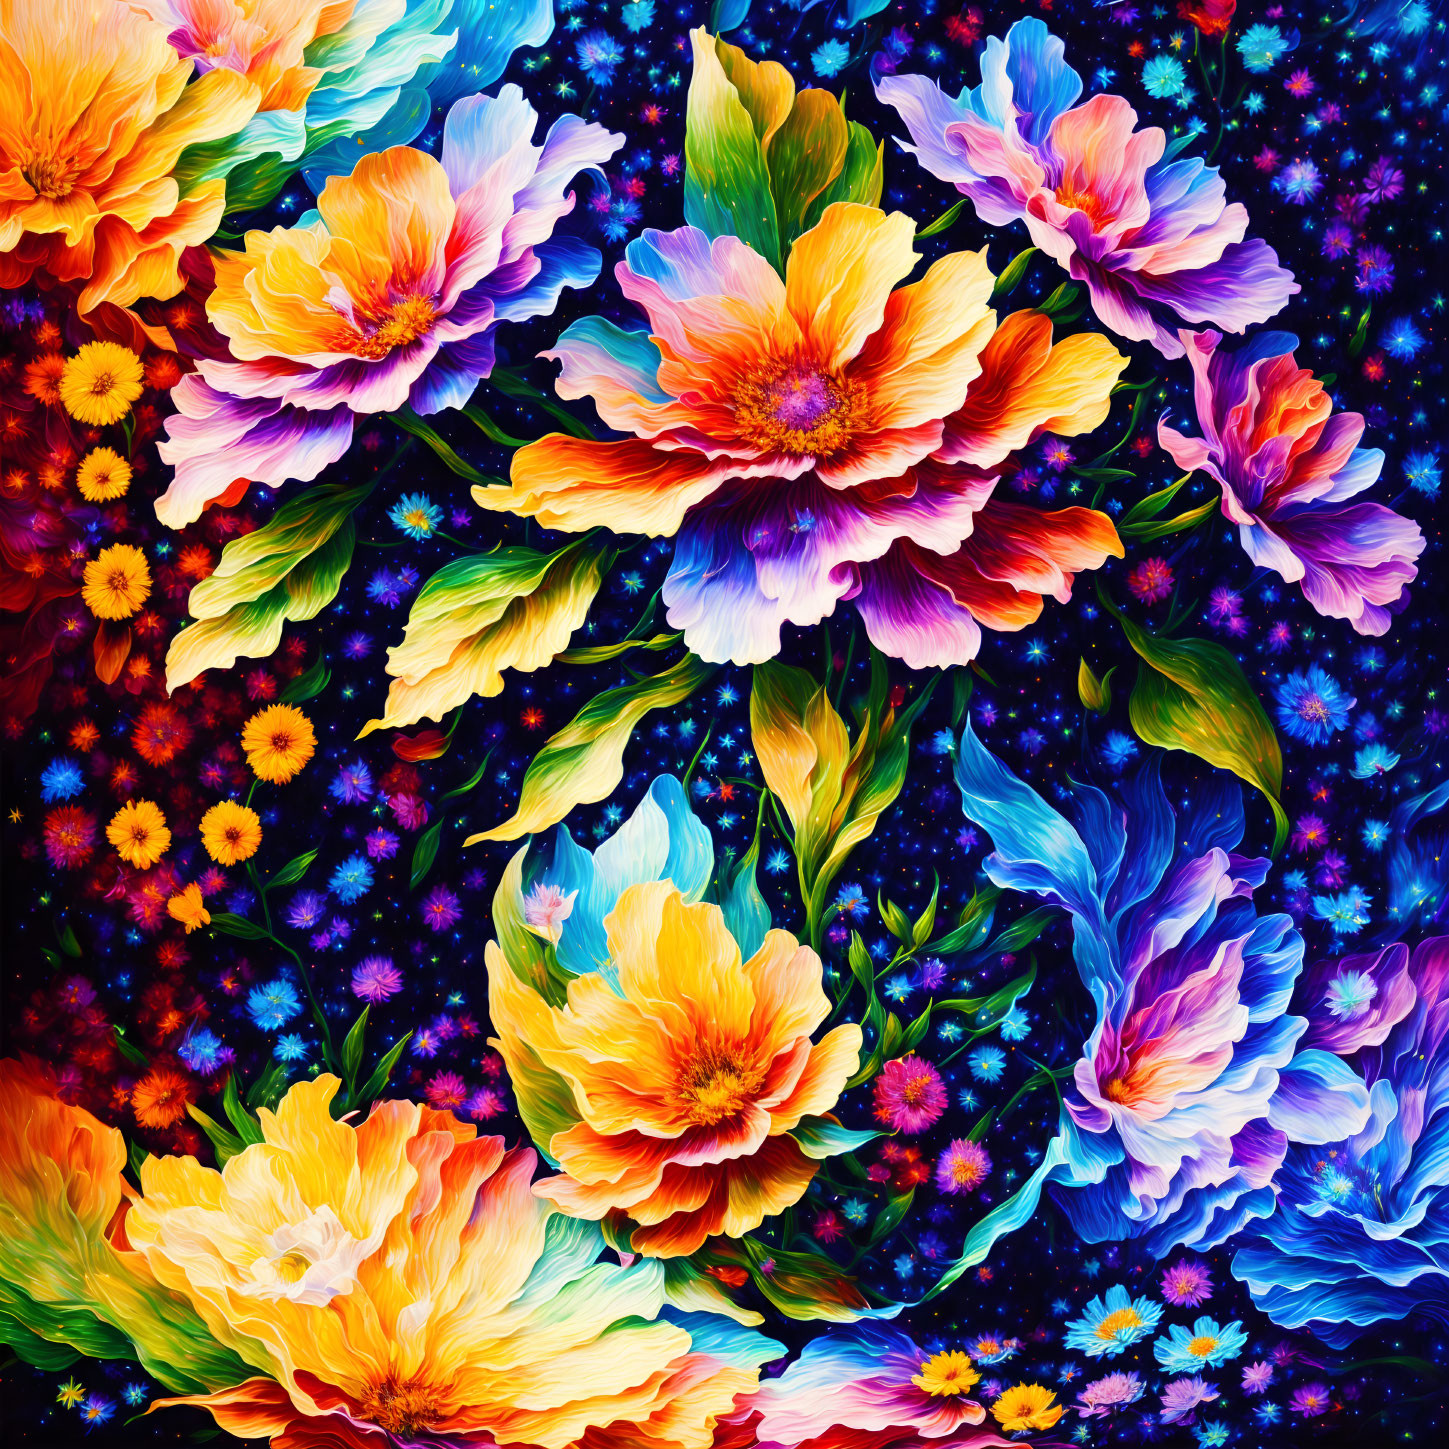 Colorful Cosmic Floral Pattern with Bright Stylized Flowers